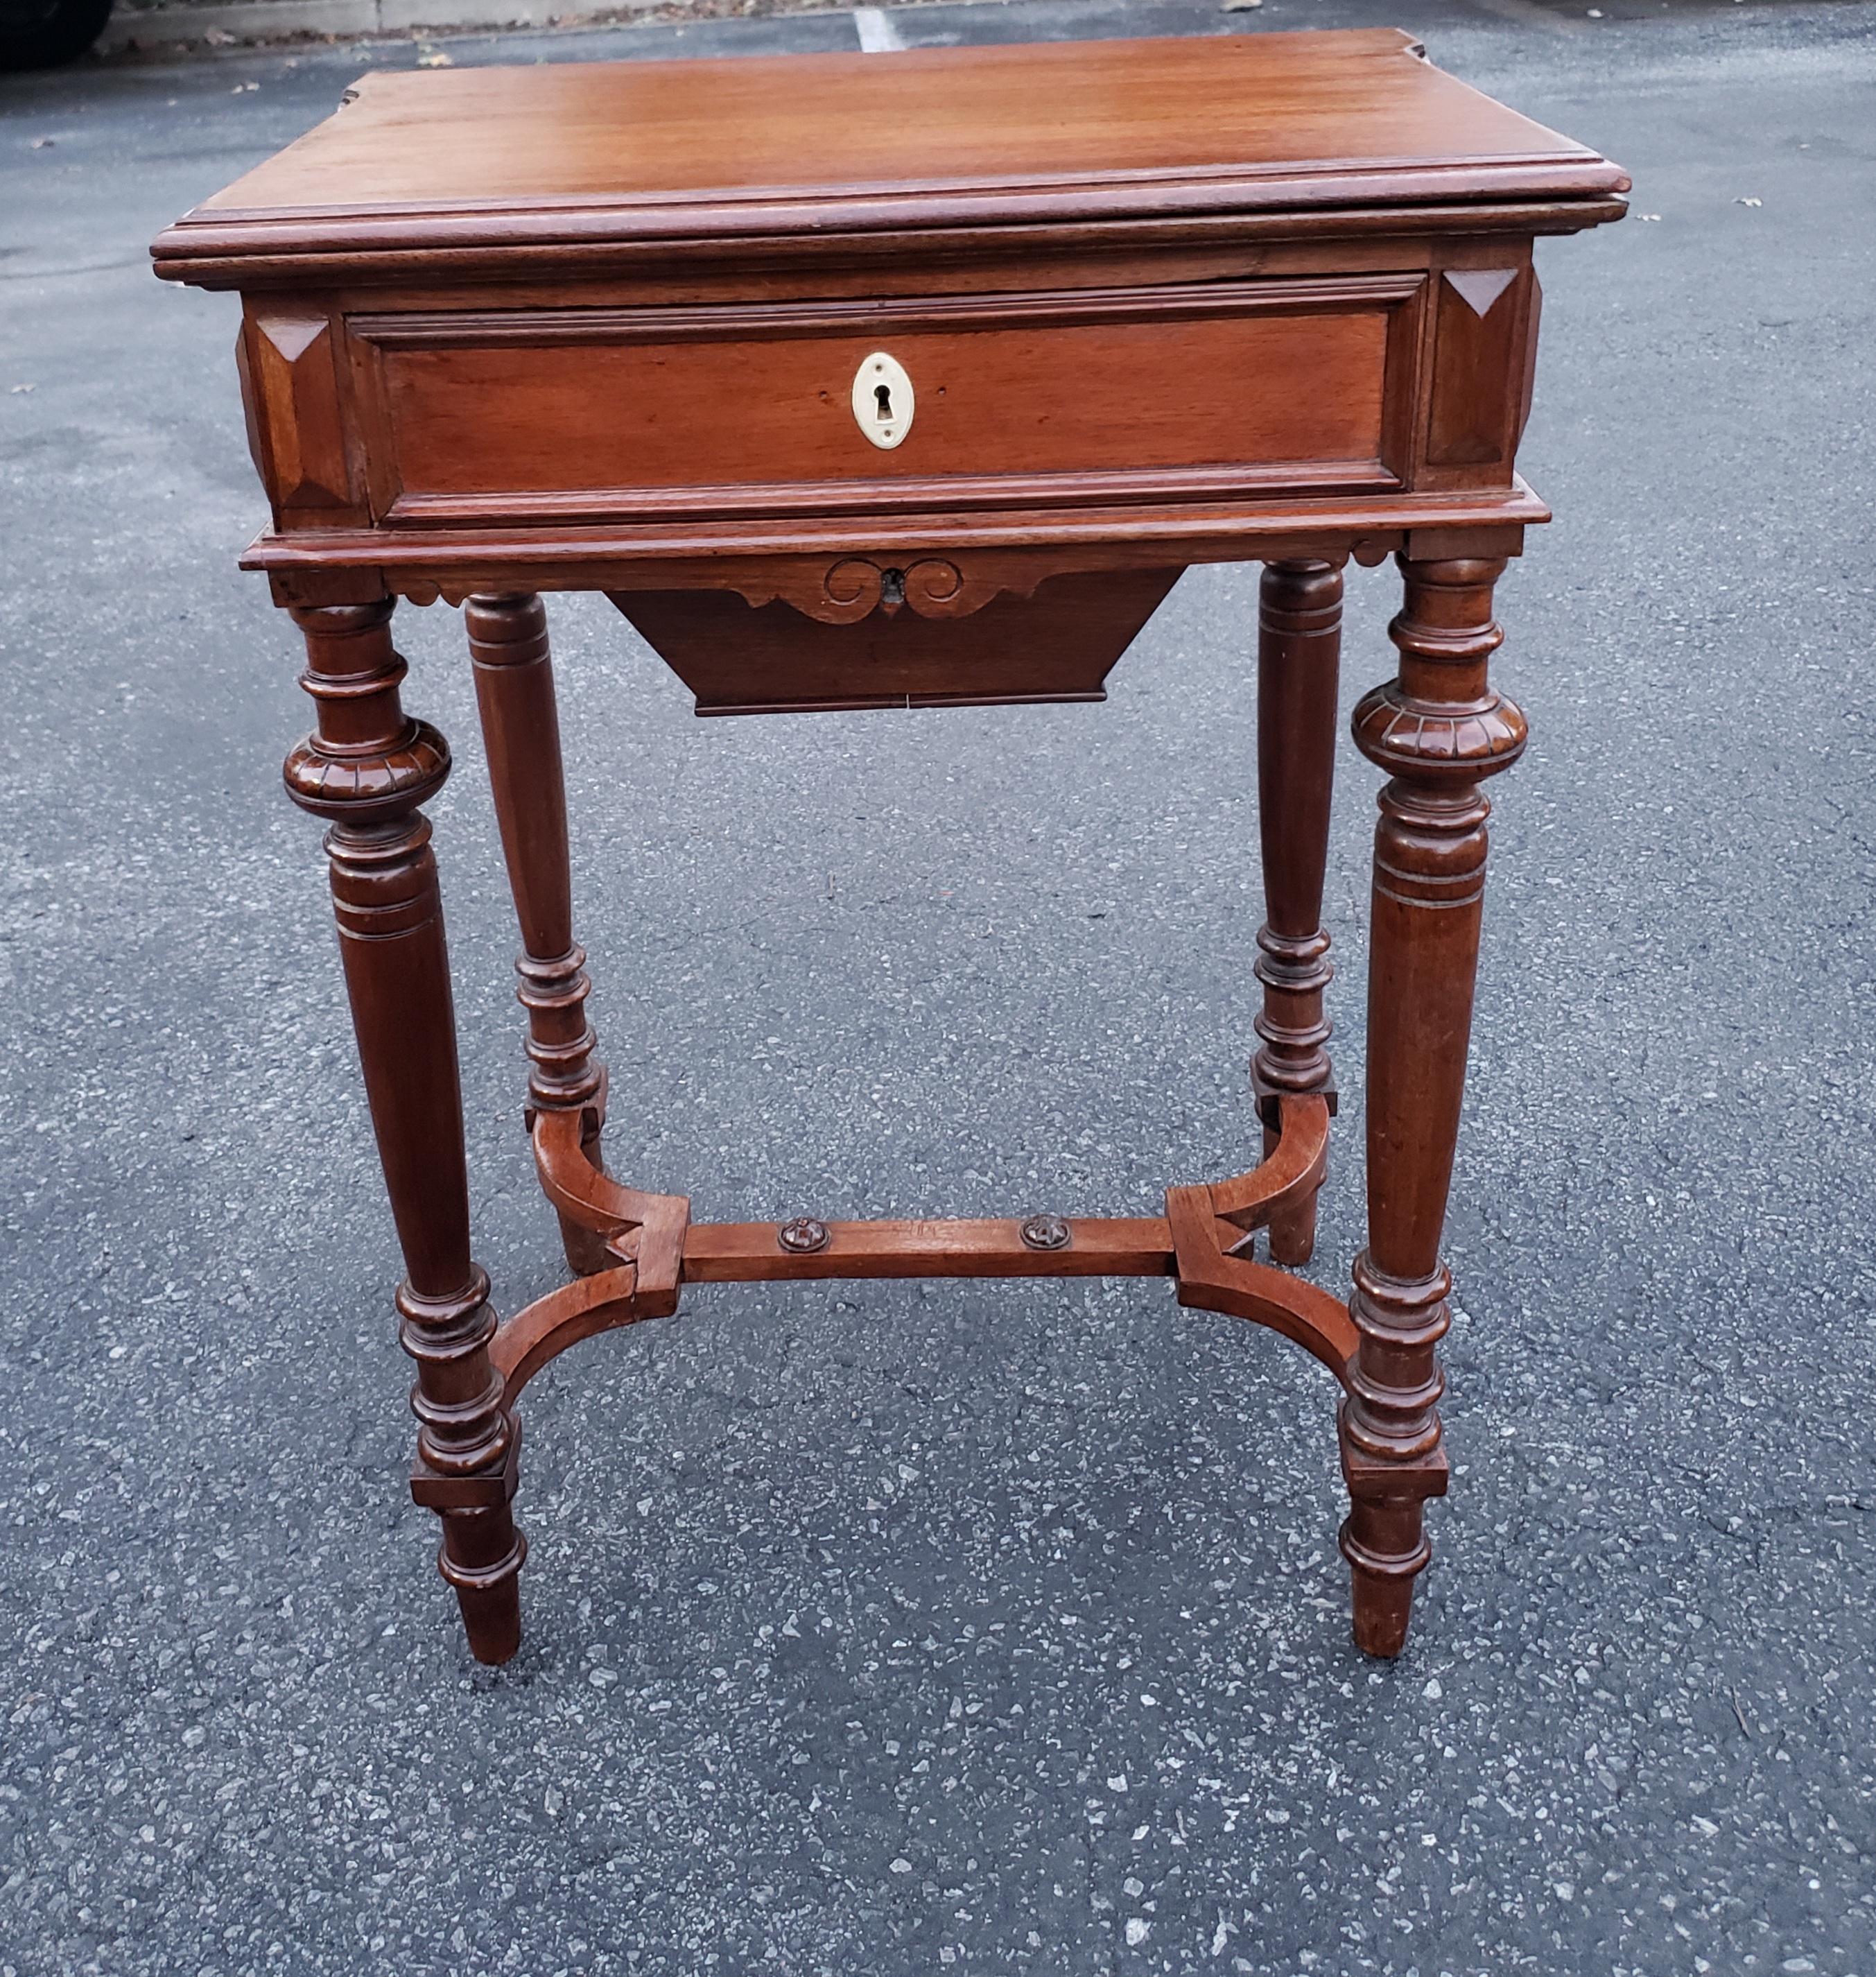 A sophisticated 19th Century William and Mary style Mahogany Two-Drawer Sewing Table or Side Table in great antique condition. Was recently refinished and looks gorgeous. Measures 21.5